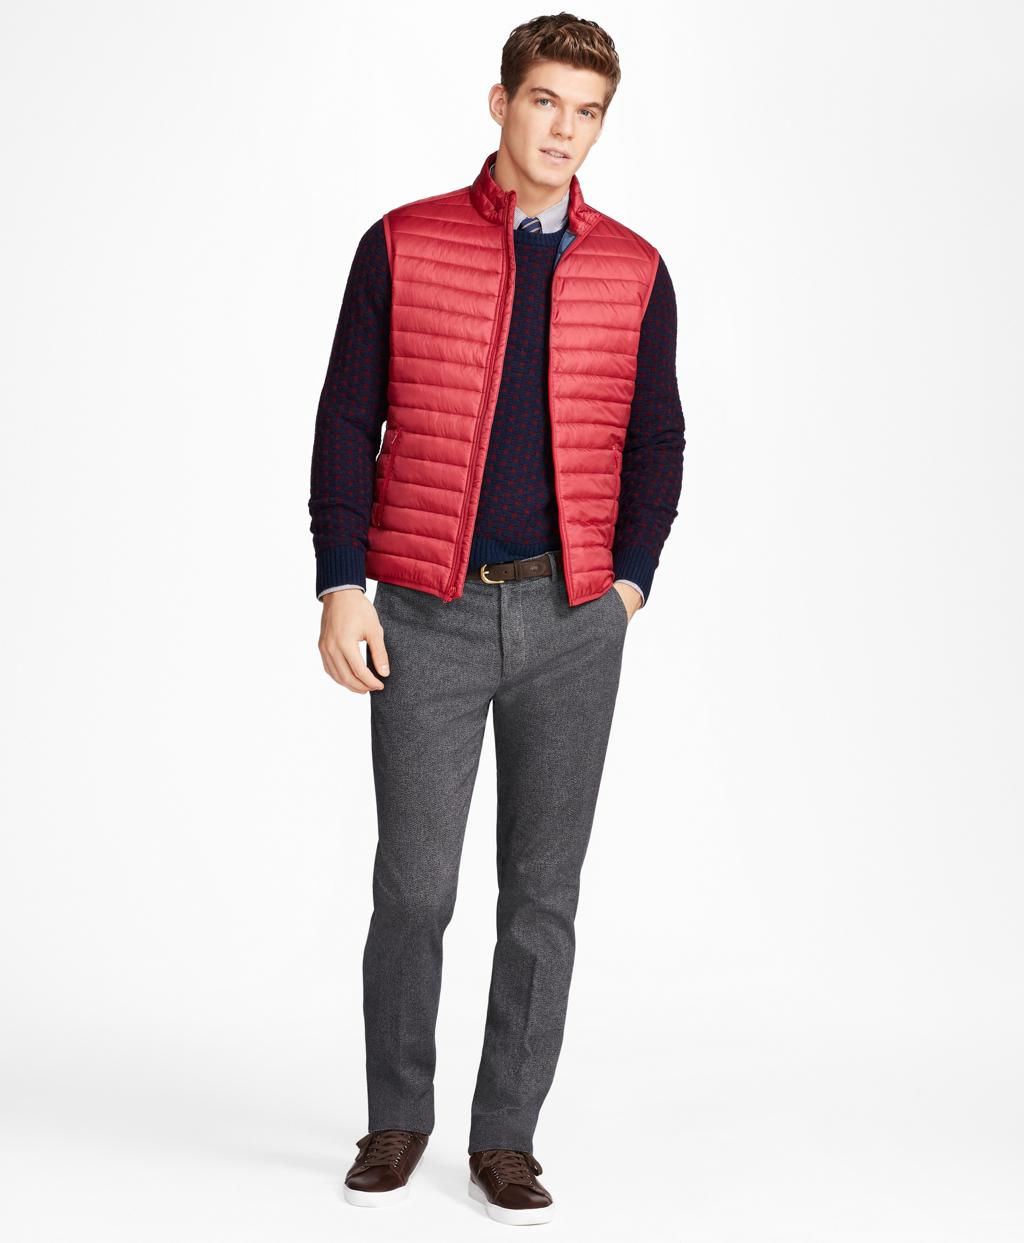 Lyst - Brooks Brothers Puffer Vest in Red for Men